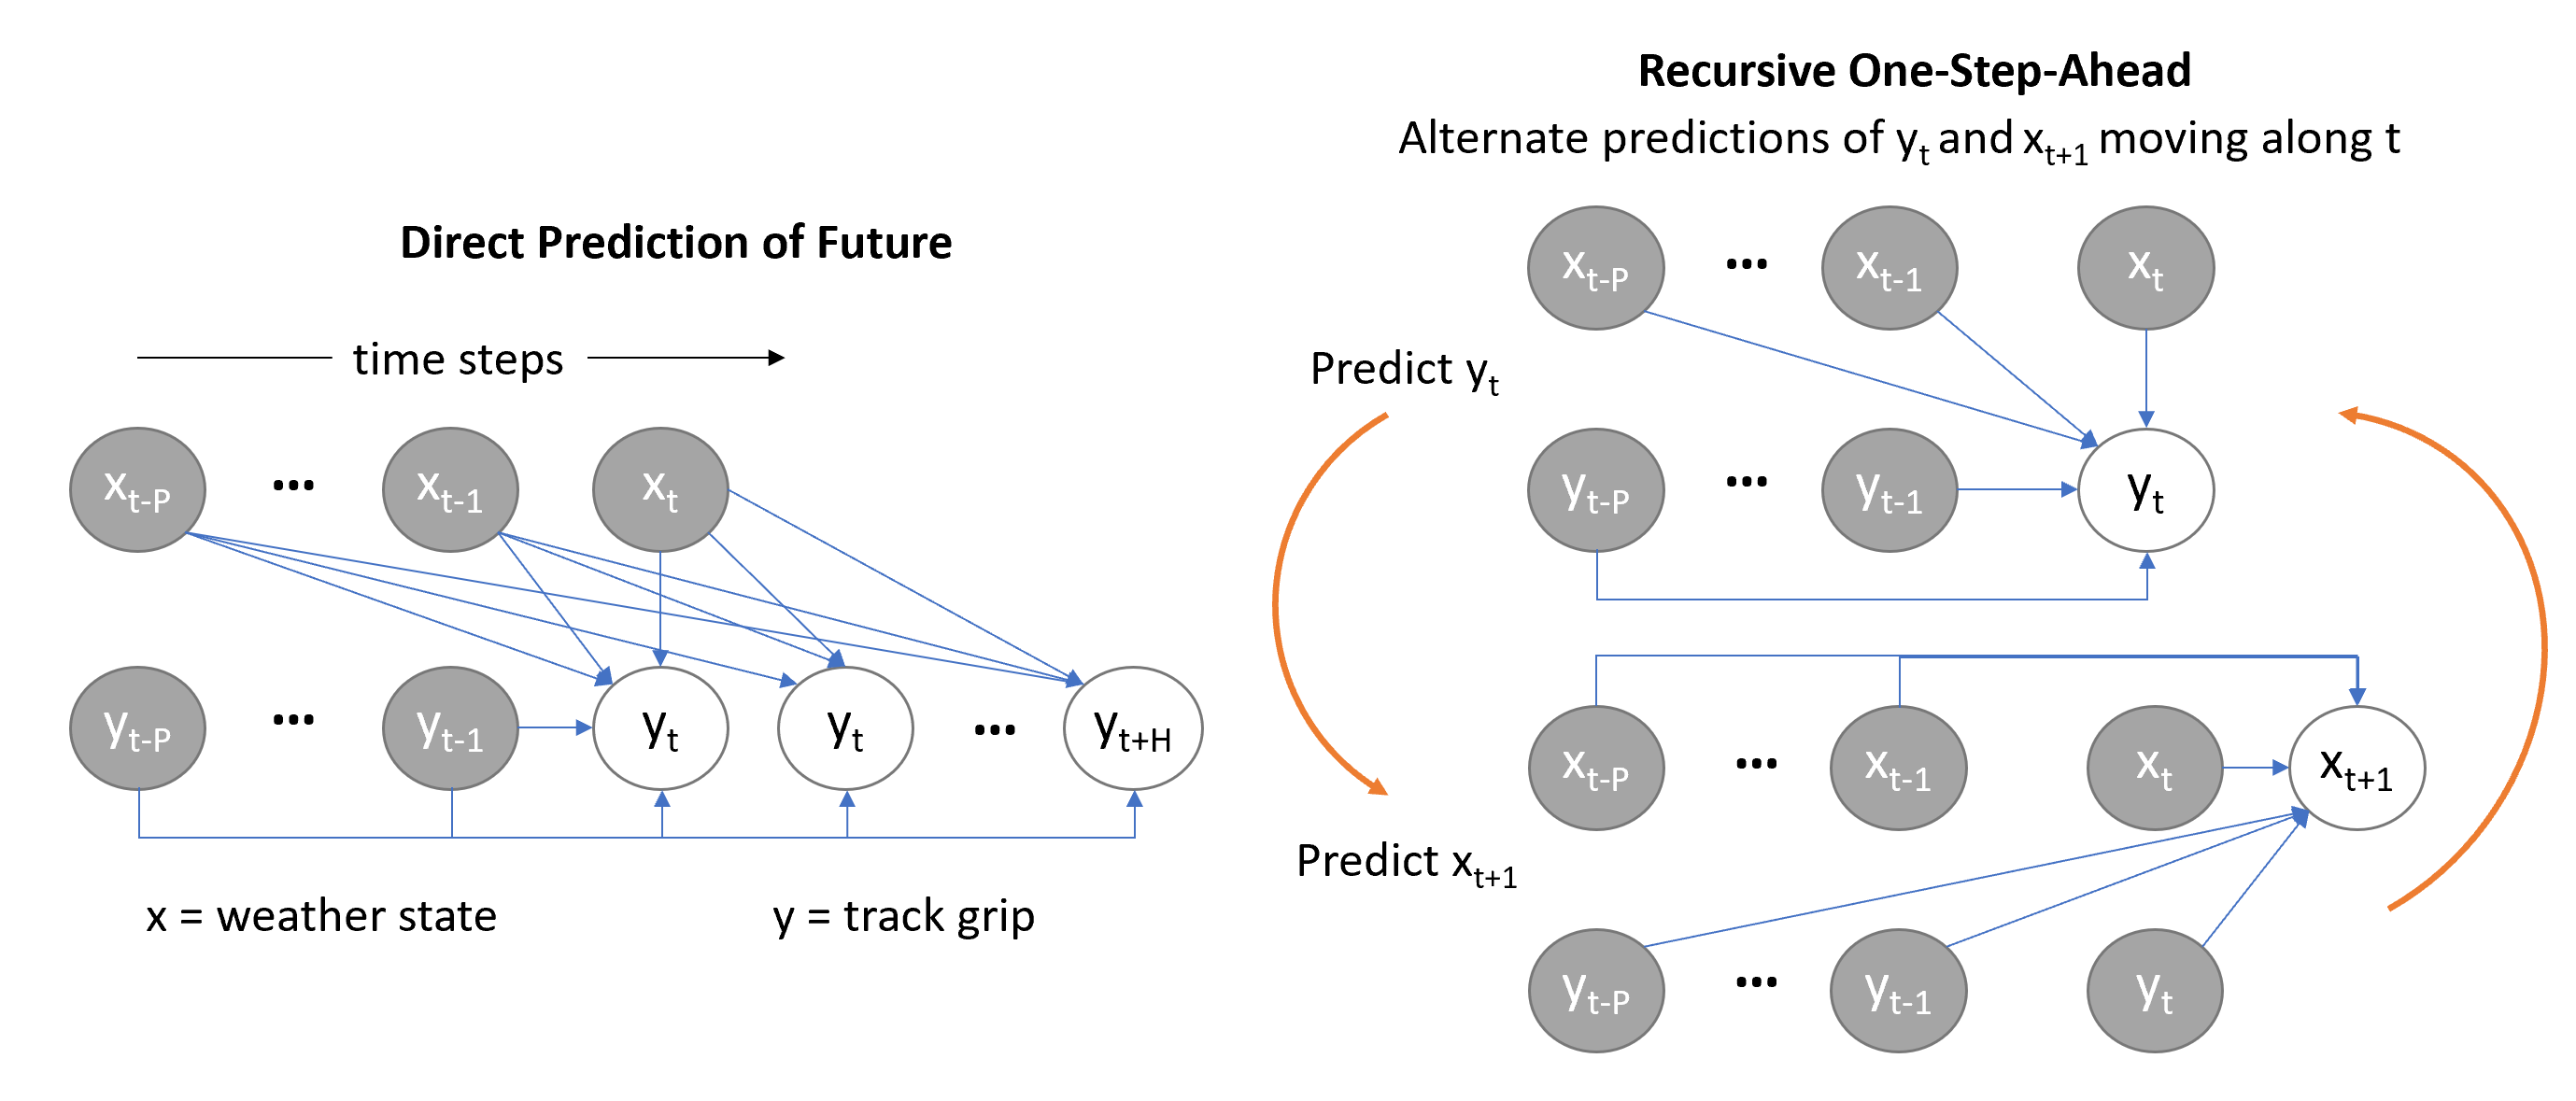 Two approaches to multi-step forecasting